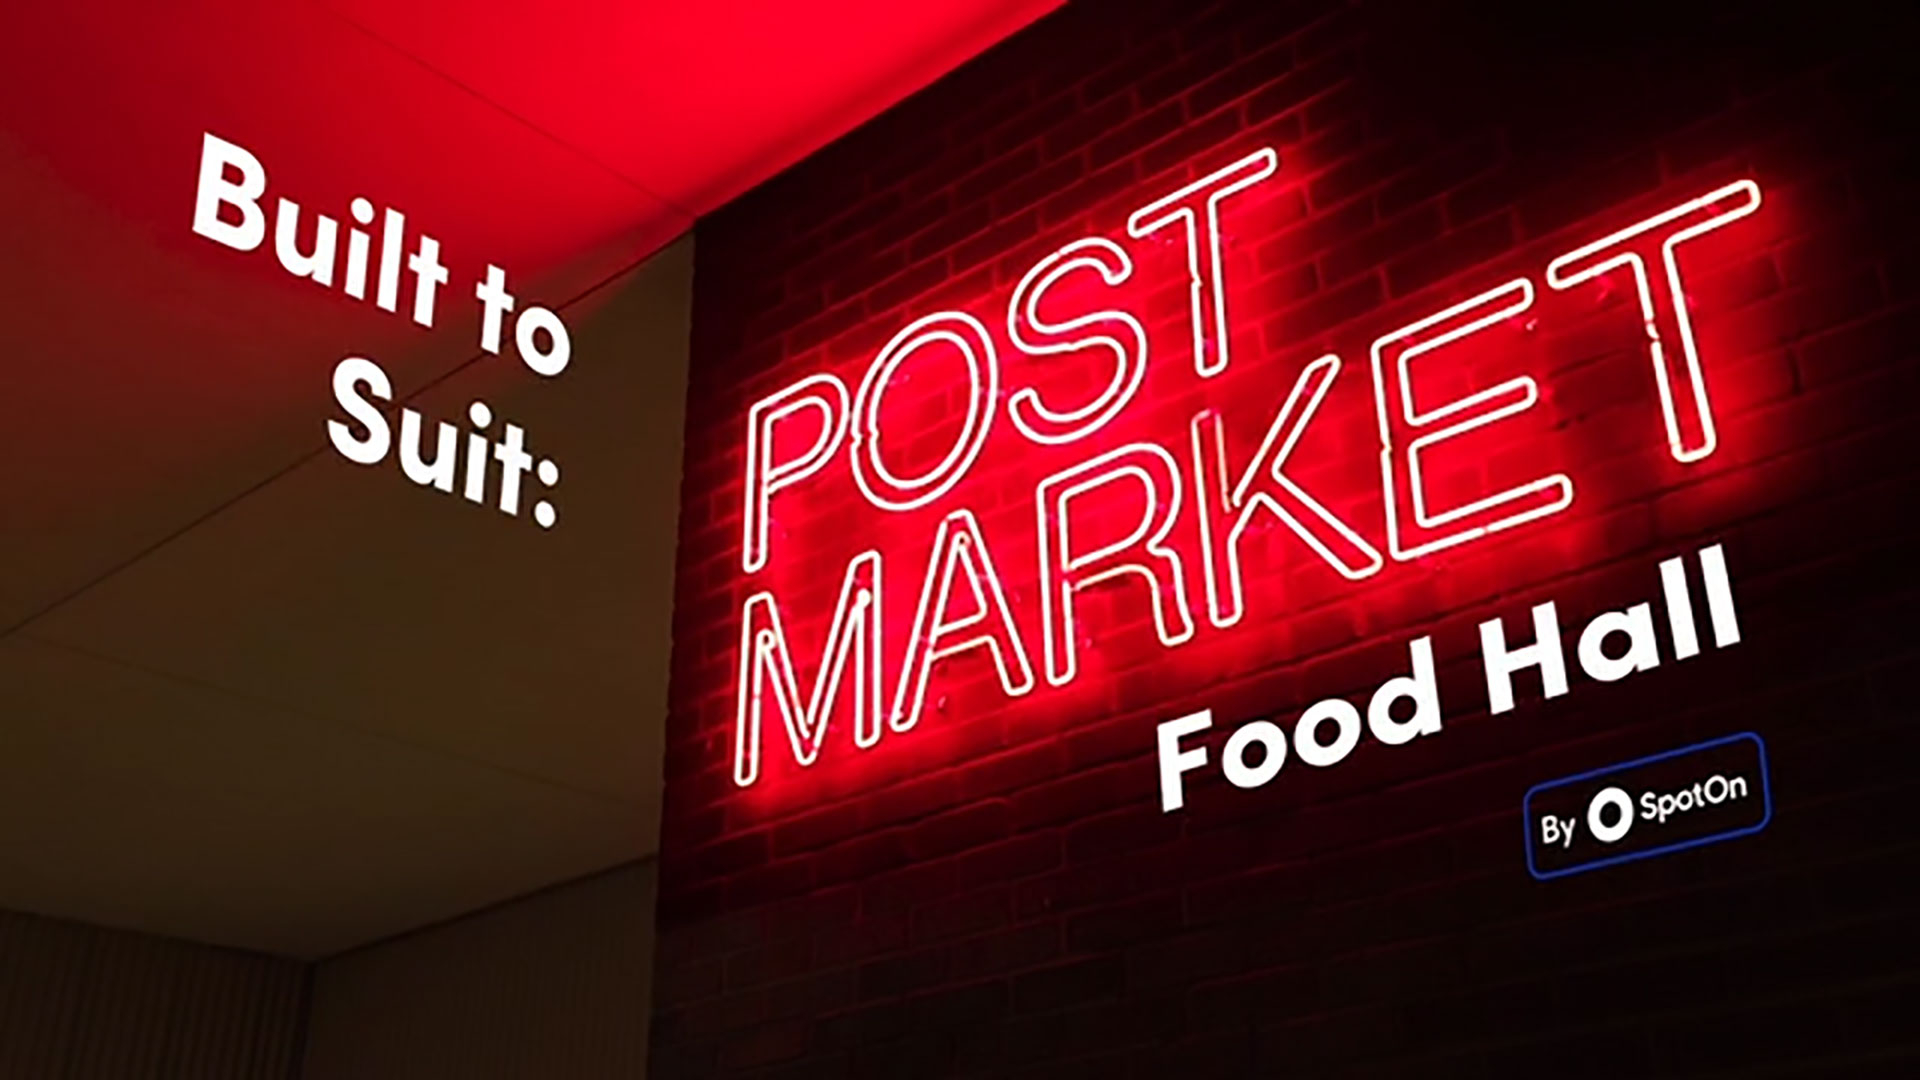 Watch how POST Market brought 30+ high-end restaurant concepts to a single food hall with the help of SpotOn's versatile restaurant solutions. From point-of-sale to mobile ordering, QR codes, and order pacing, SpotOn is there to streamline operations and help create a premier guest experience.